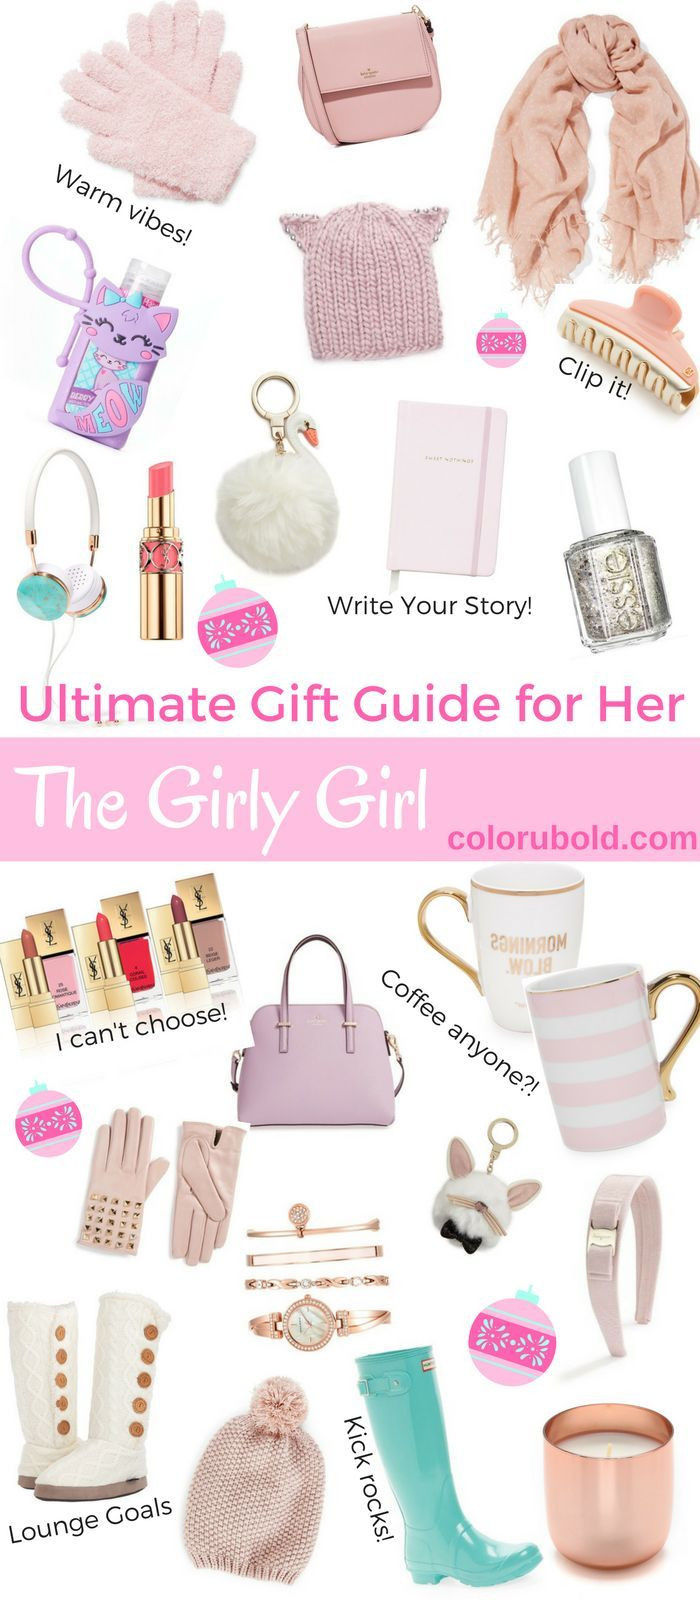 Birthday Gift For Teenage Girl
 The Ultimate Gift Guide for the Girly Girl